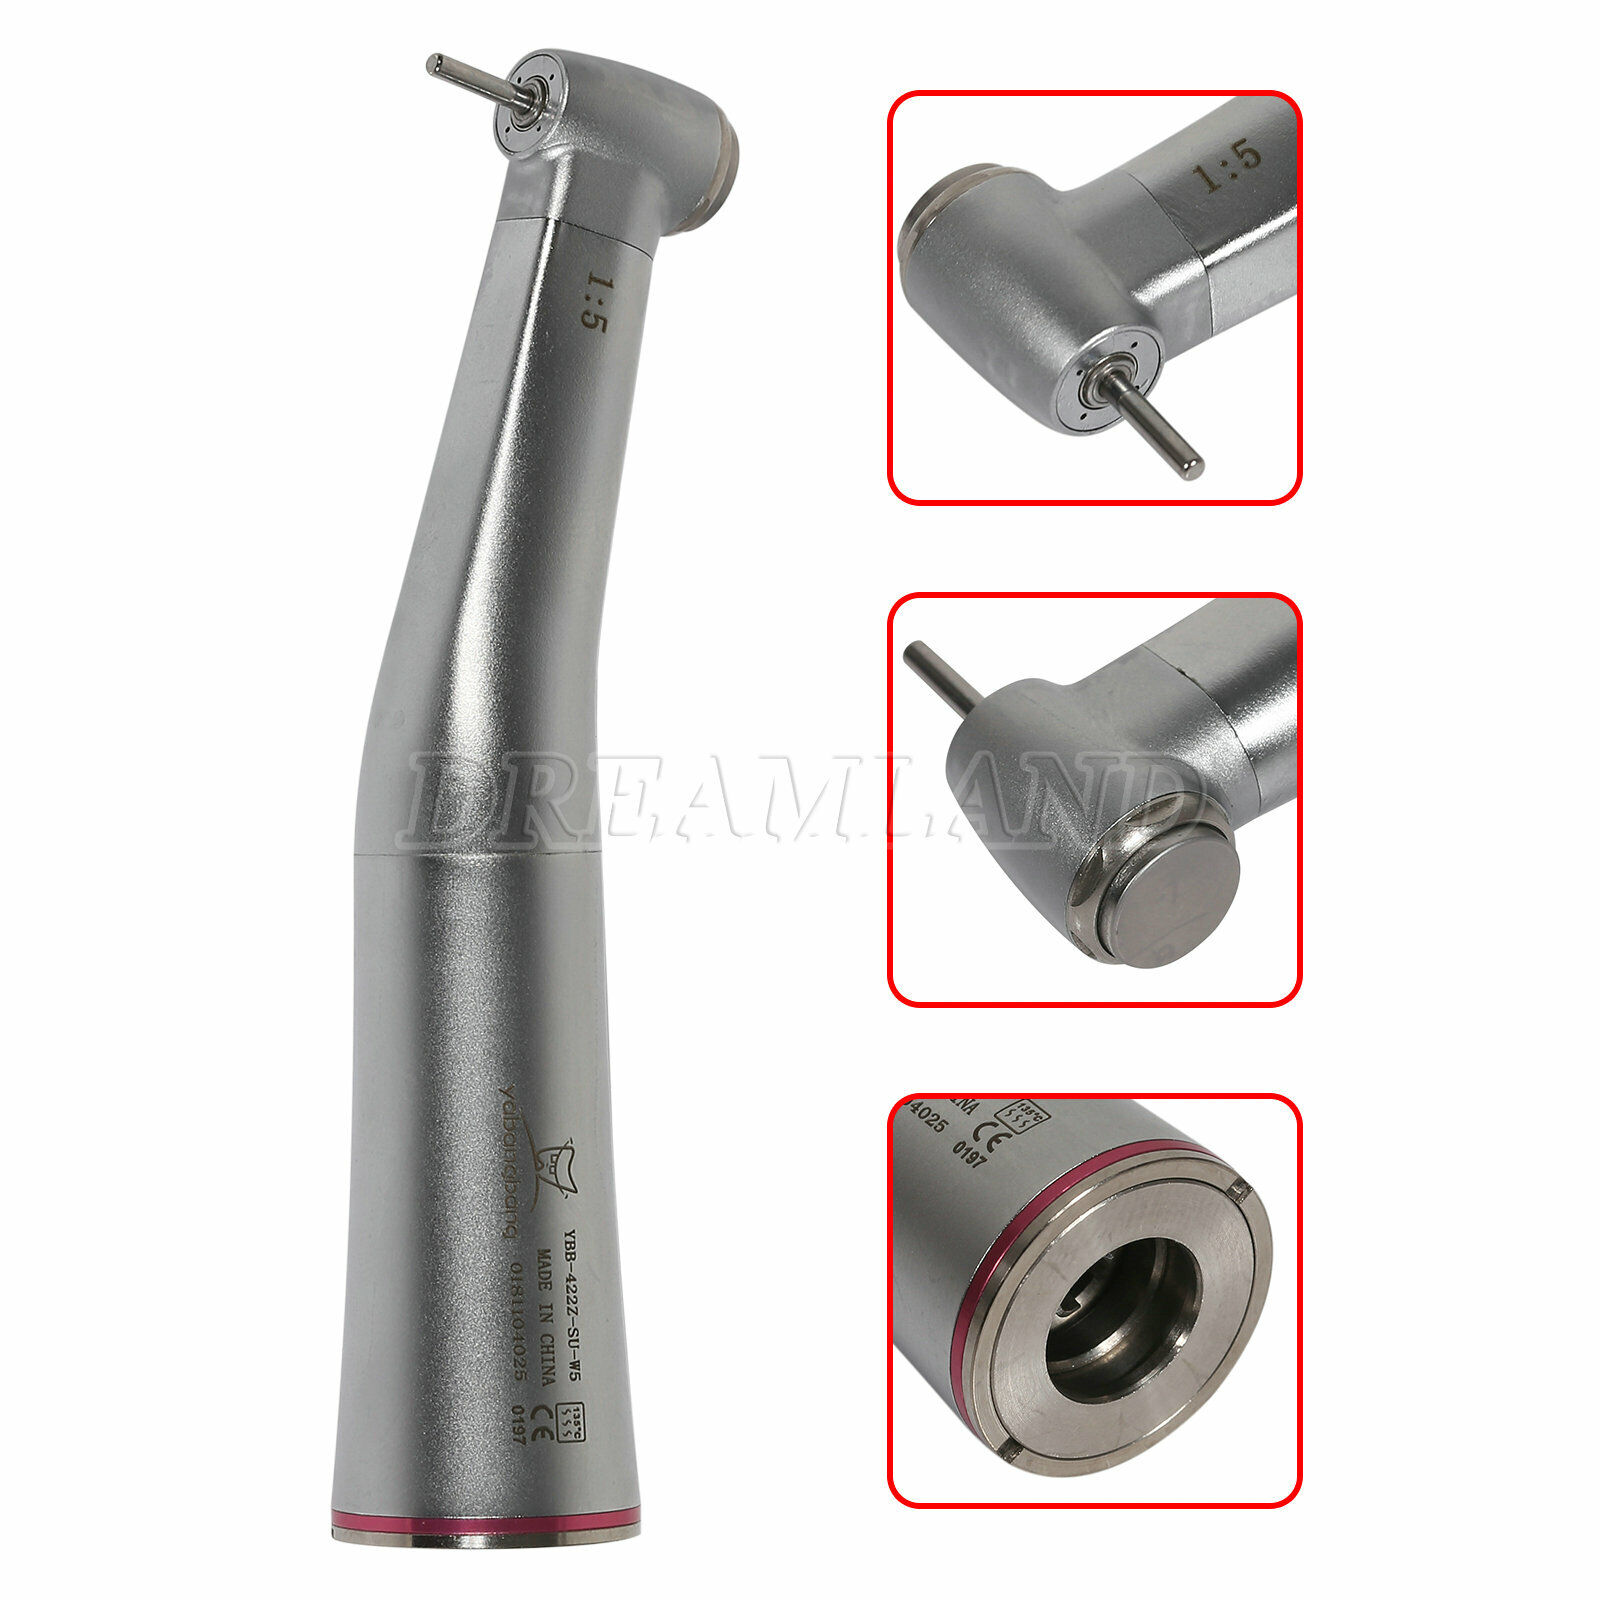 New Dental 10:1/20:1/1:1/1:5/1:4.2 Endo/Implant Contra Angle/Straight Handpiece